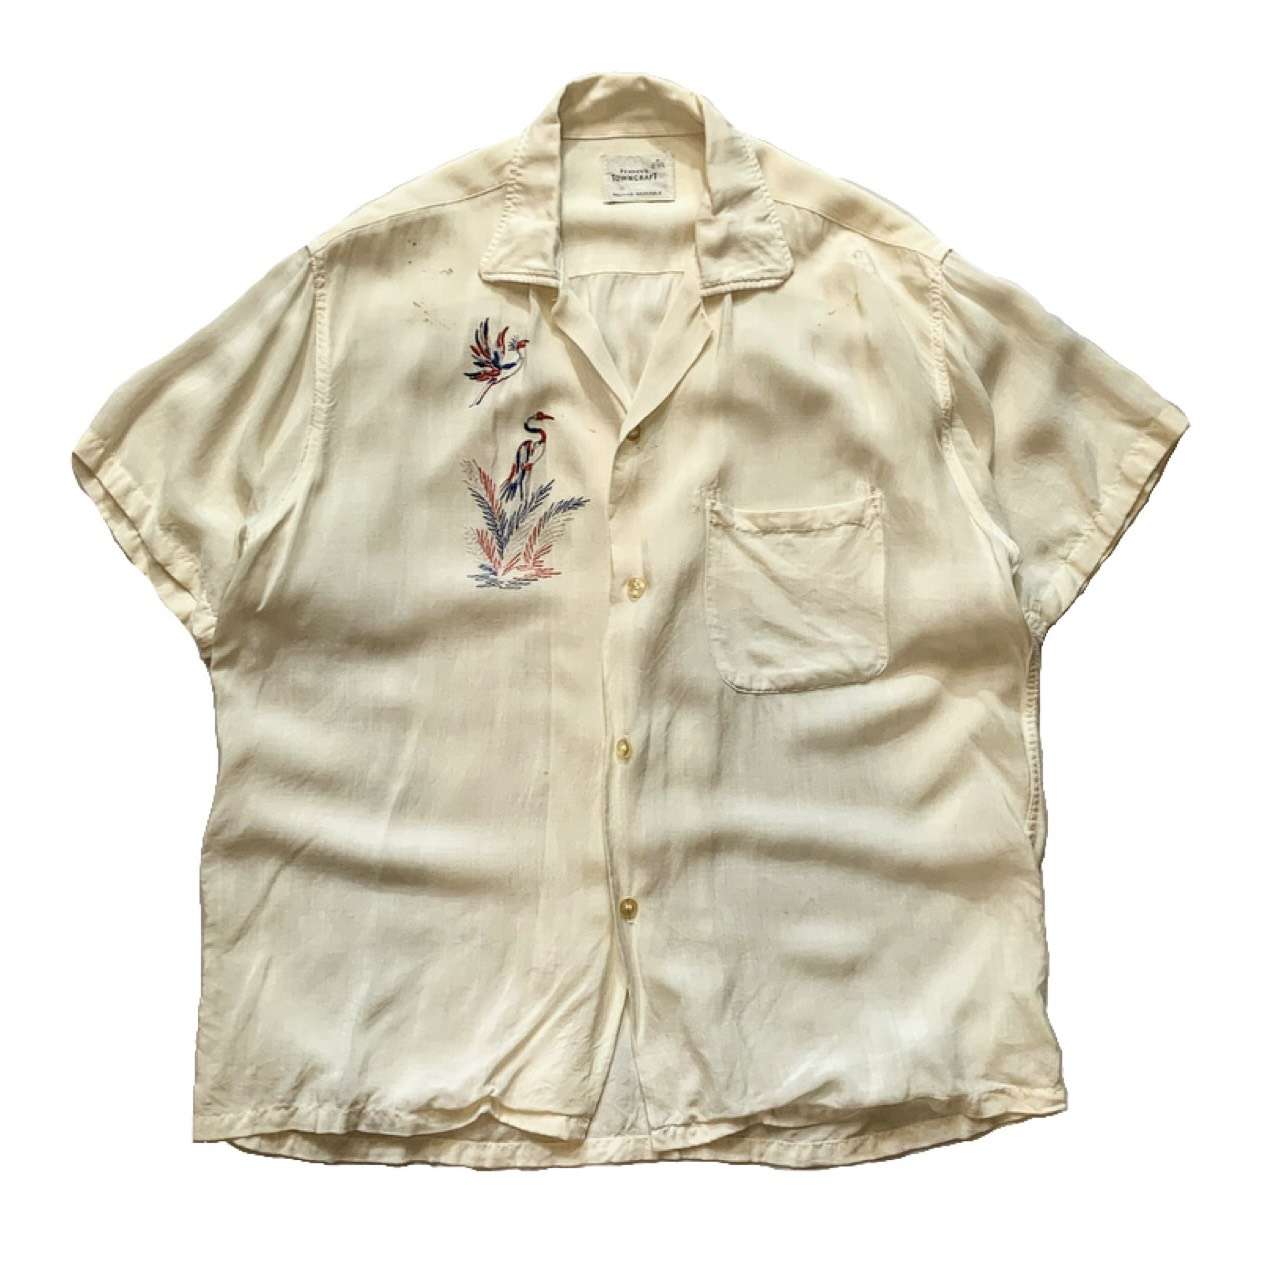 60's PENNY'S TOWN CRAFT S/S Open Collar Shirt